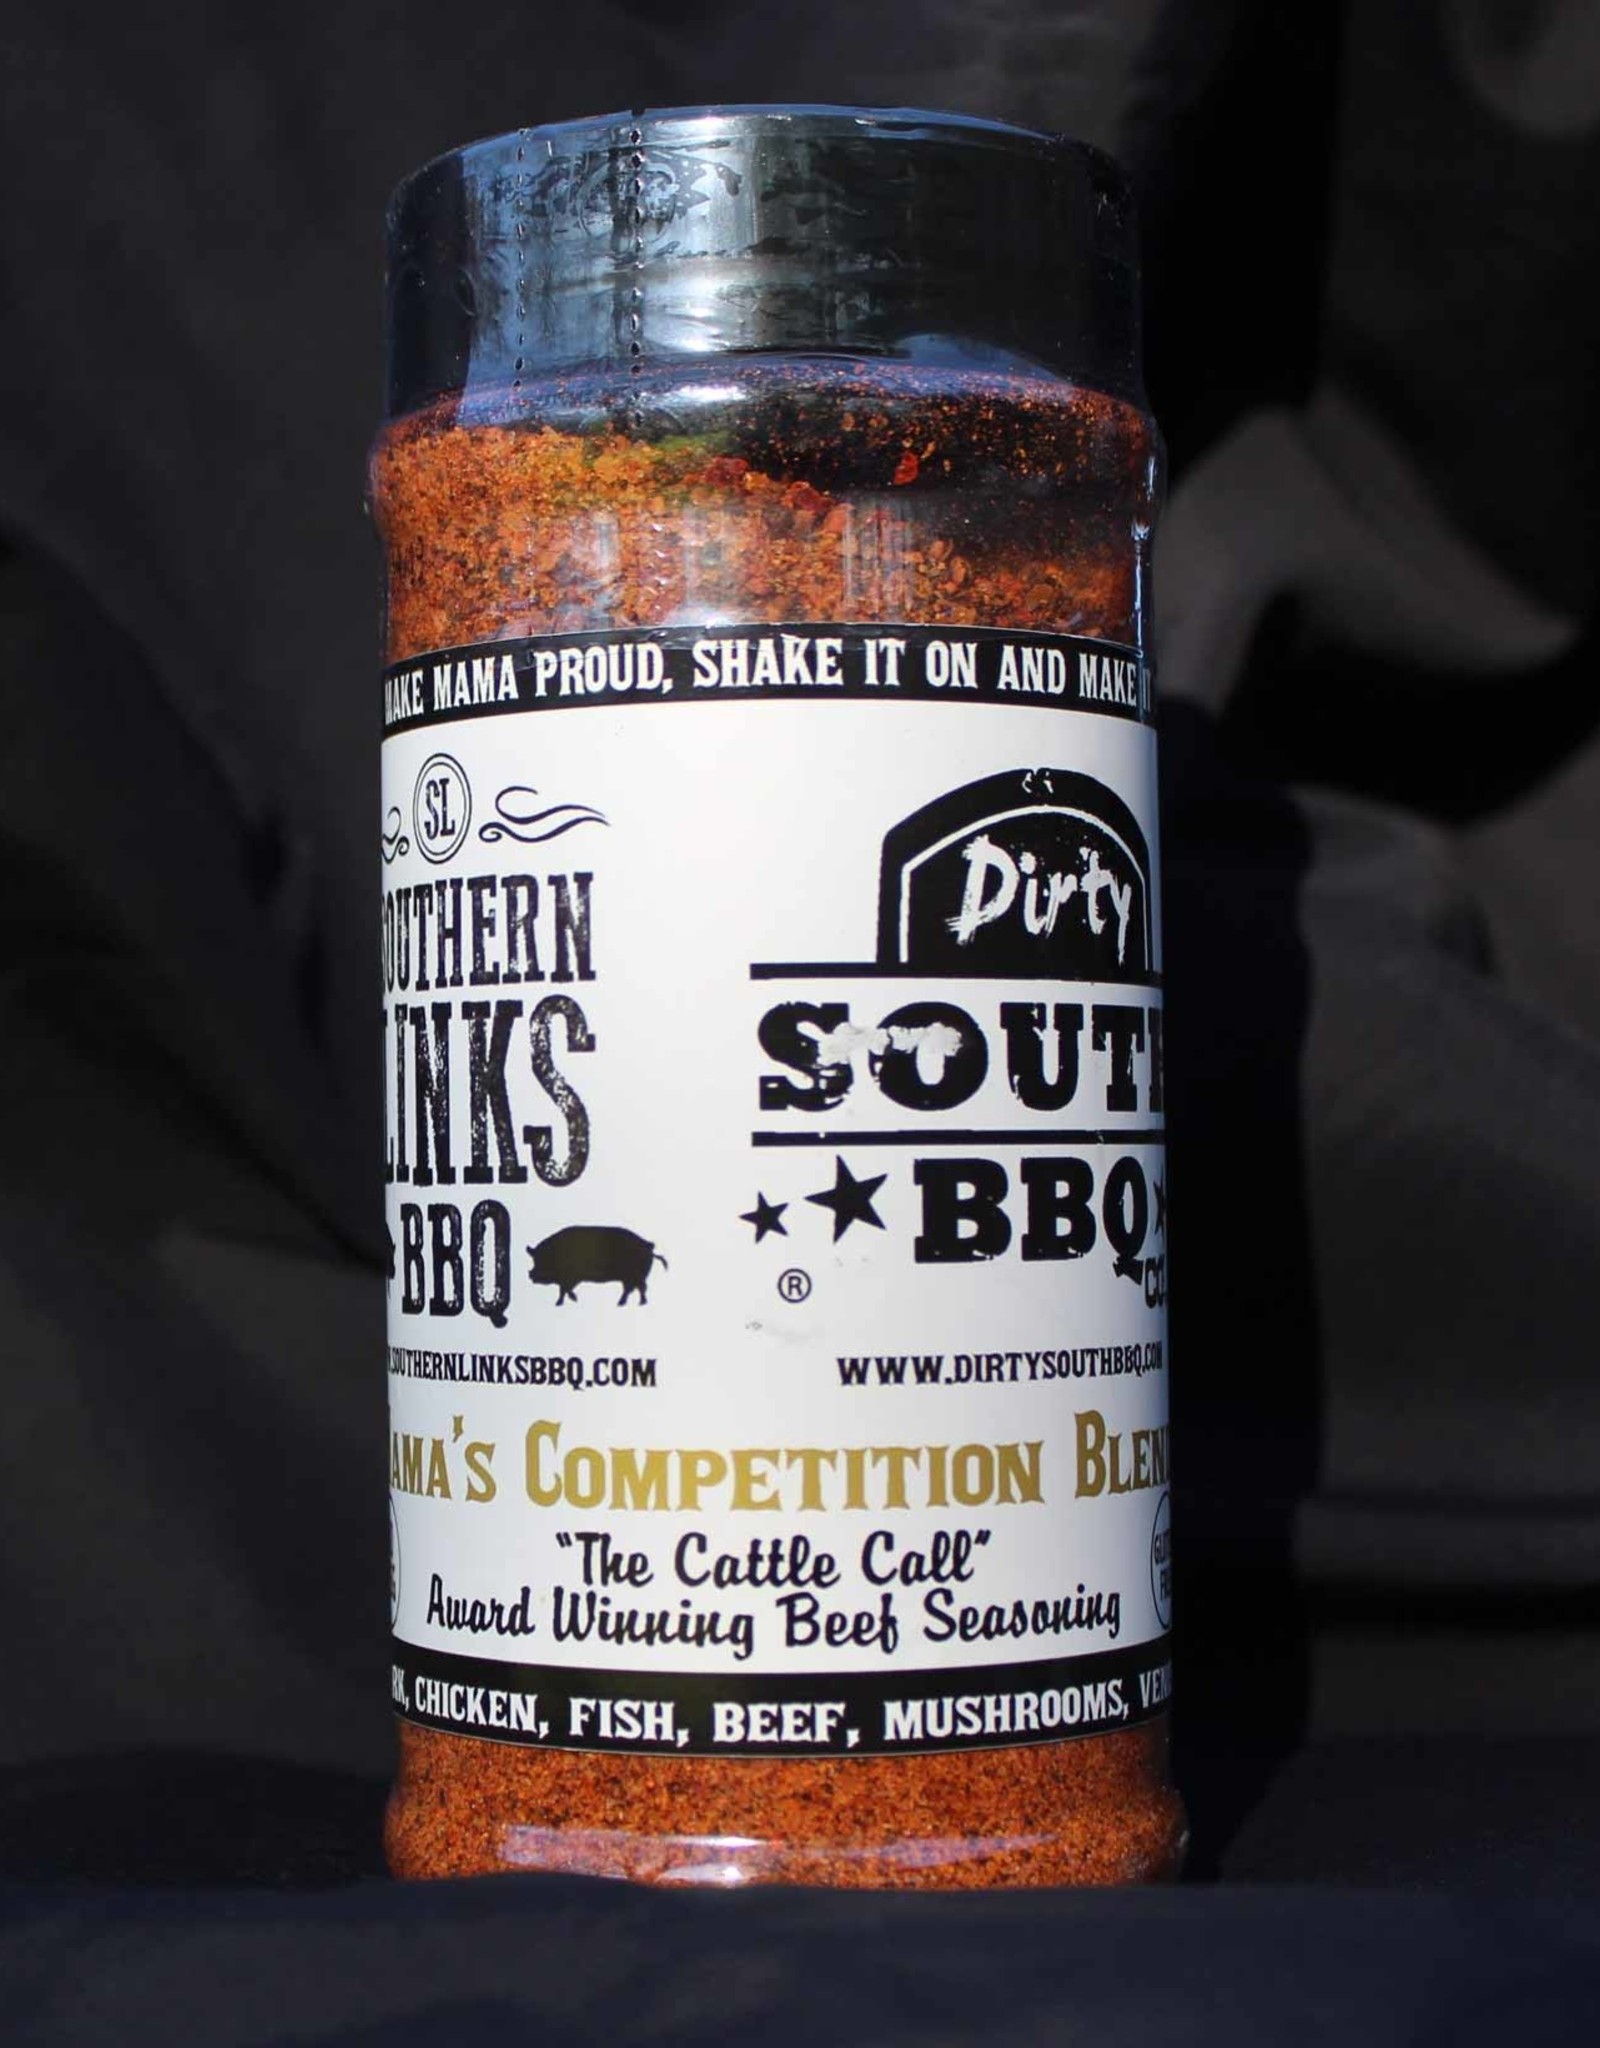 Dirty South BBQ Dirty South BBQ - Mama's Competition Blend (10.9 oz.)